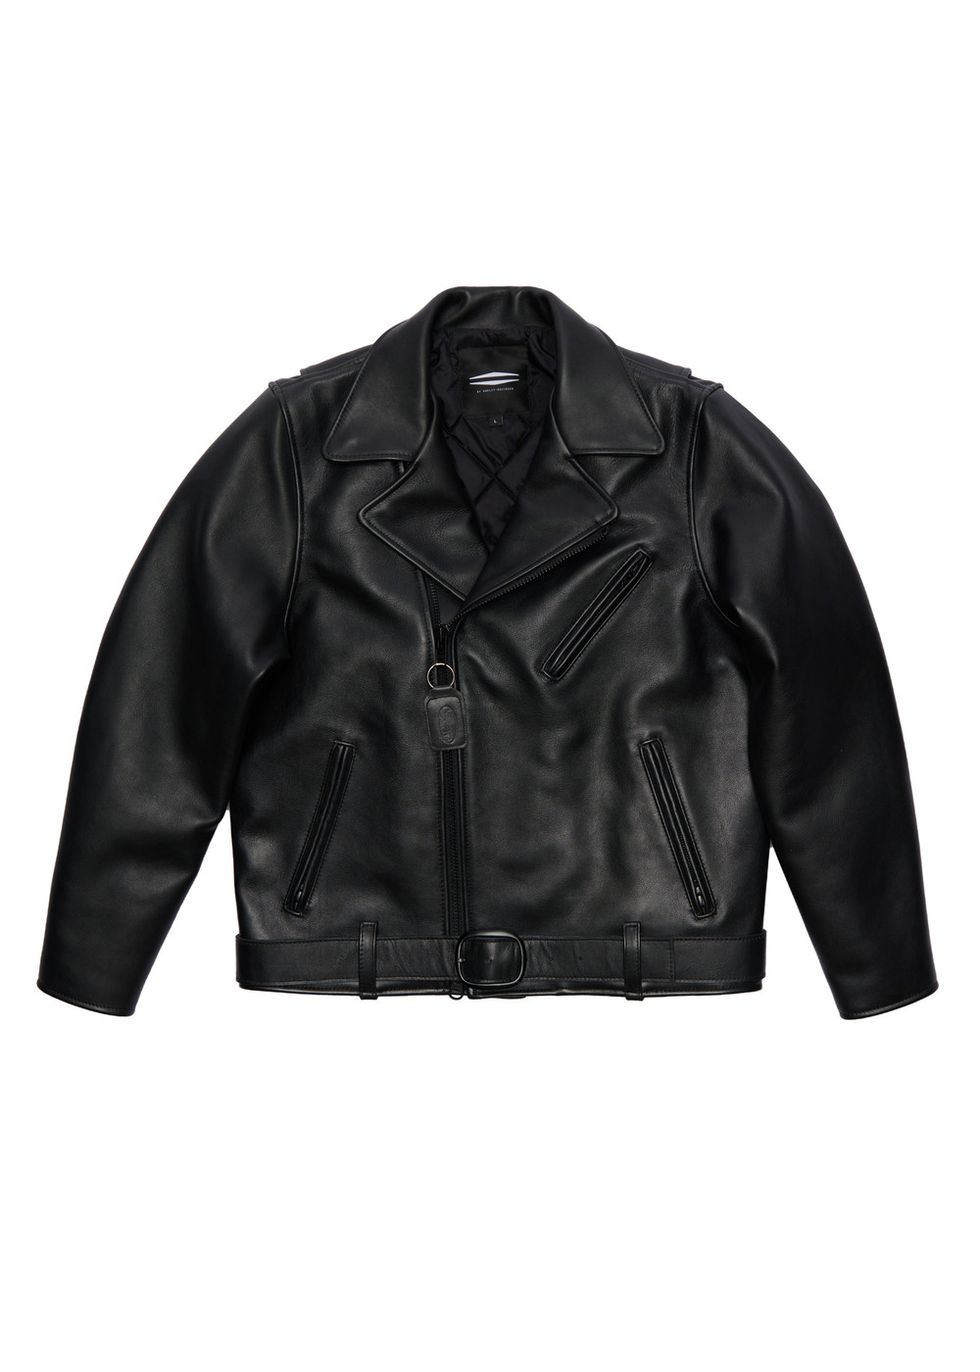 H-D Collections by Harley-Davidson Just Curated A Go-To Wardrobe